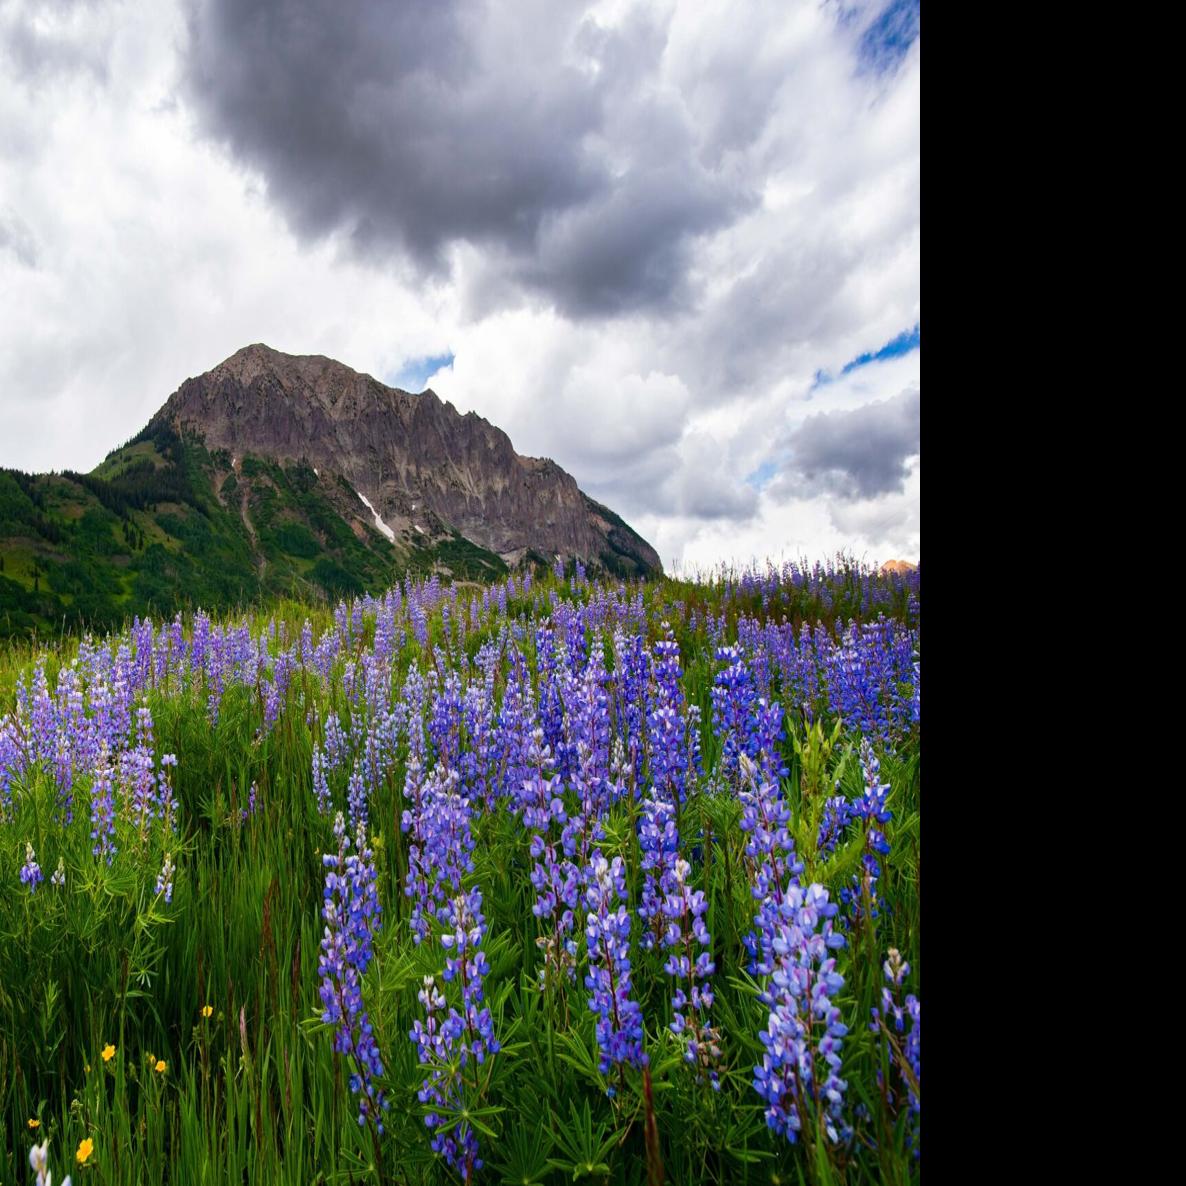 It's looking like a very good year for wildflowers in Colorado. Here's why